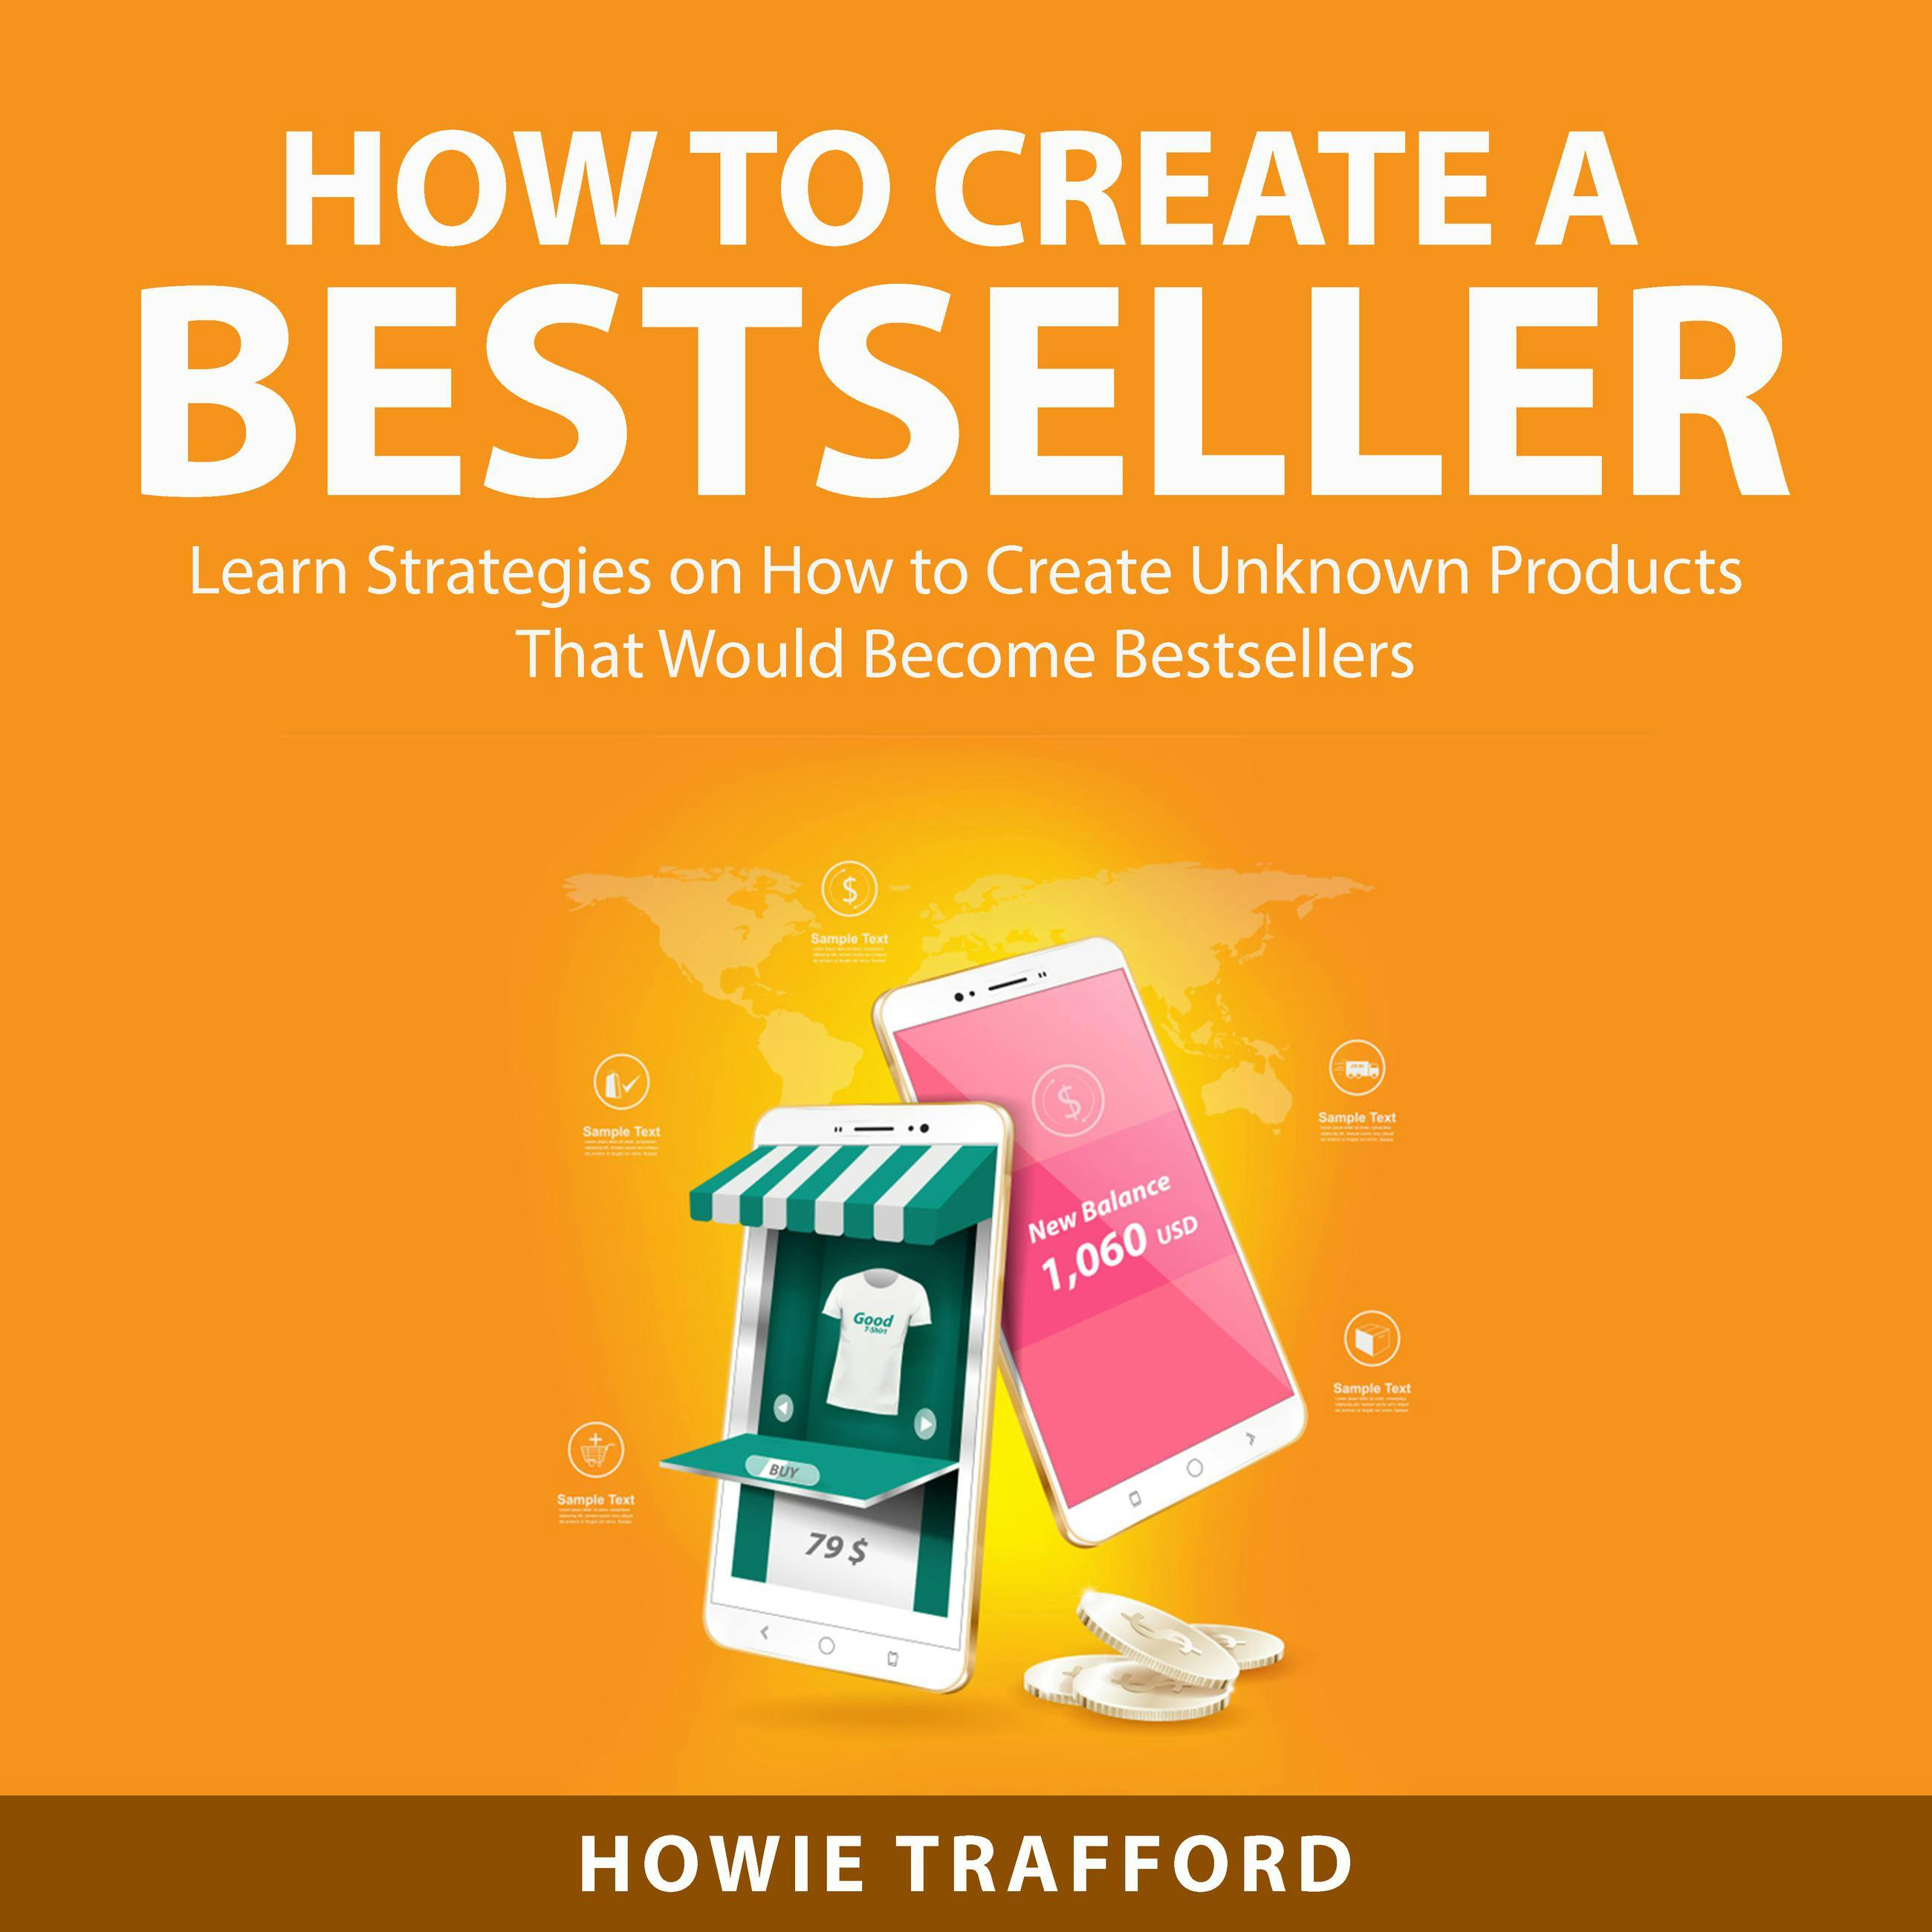 How to Create a Bestseller: Learn Strategies on How to Create Unknown Products That Would Become Bestsellers - Howie Trafford